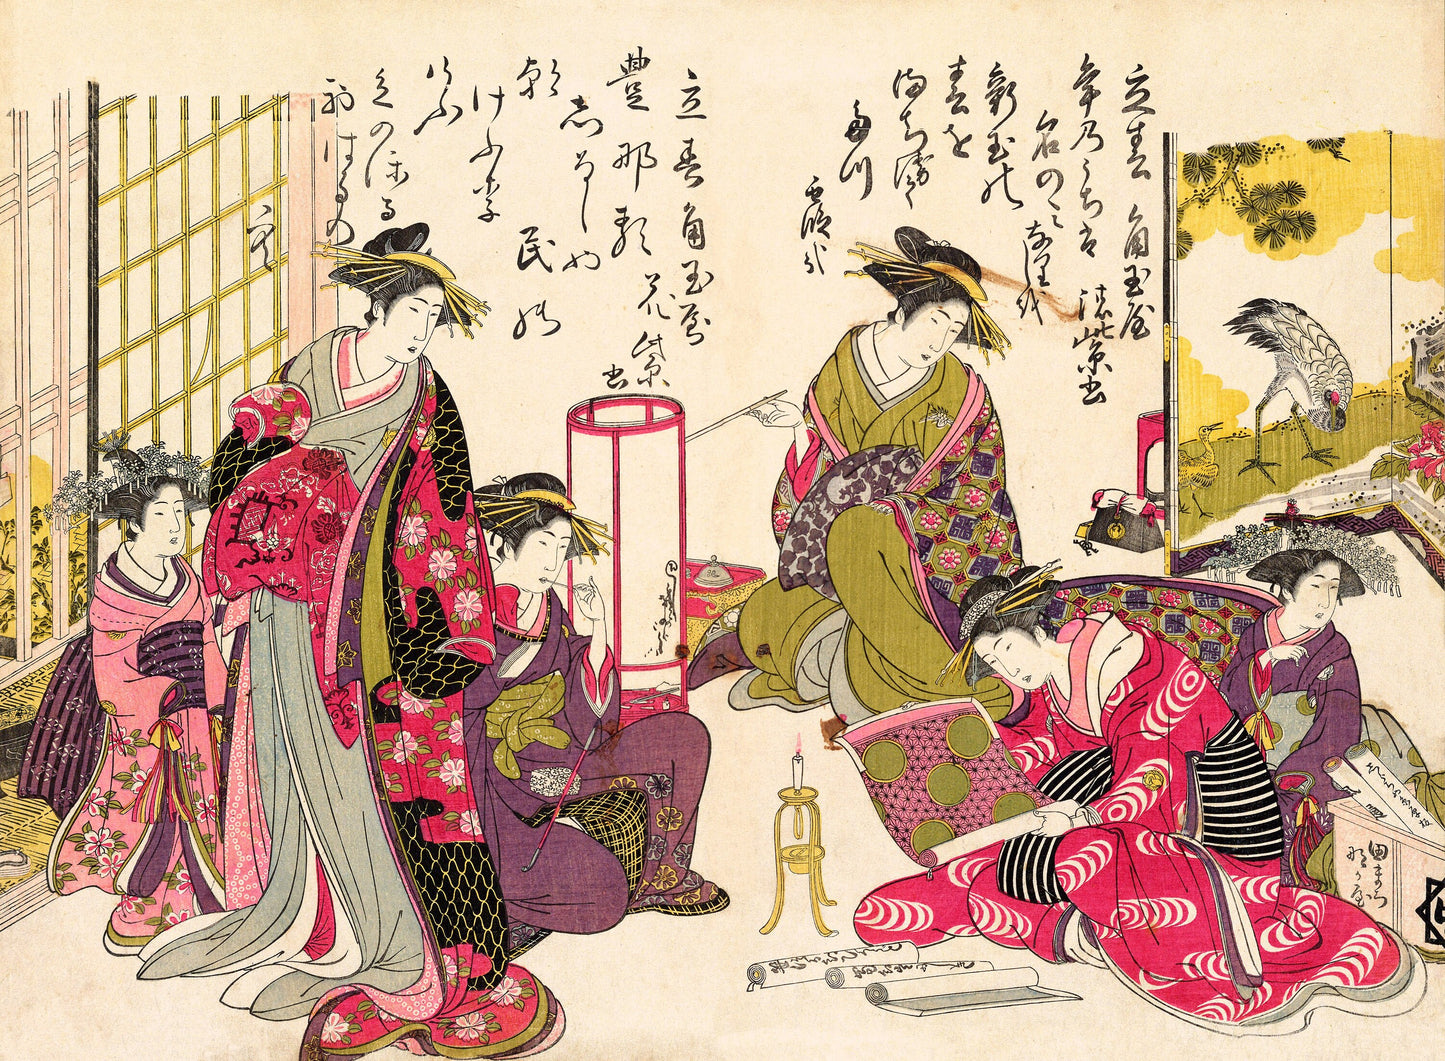 Santo Kyoden Edo Period Woodblock Prints [7 Images]